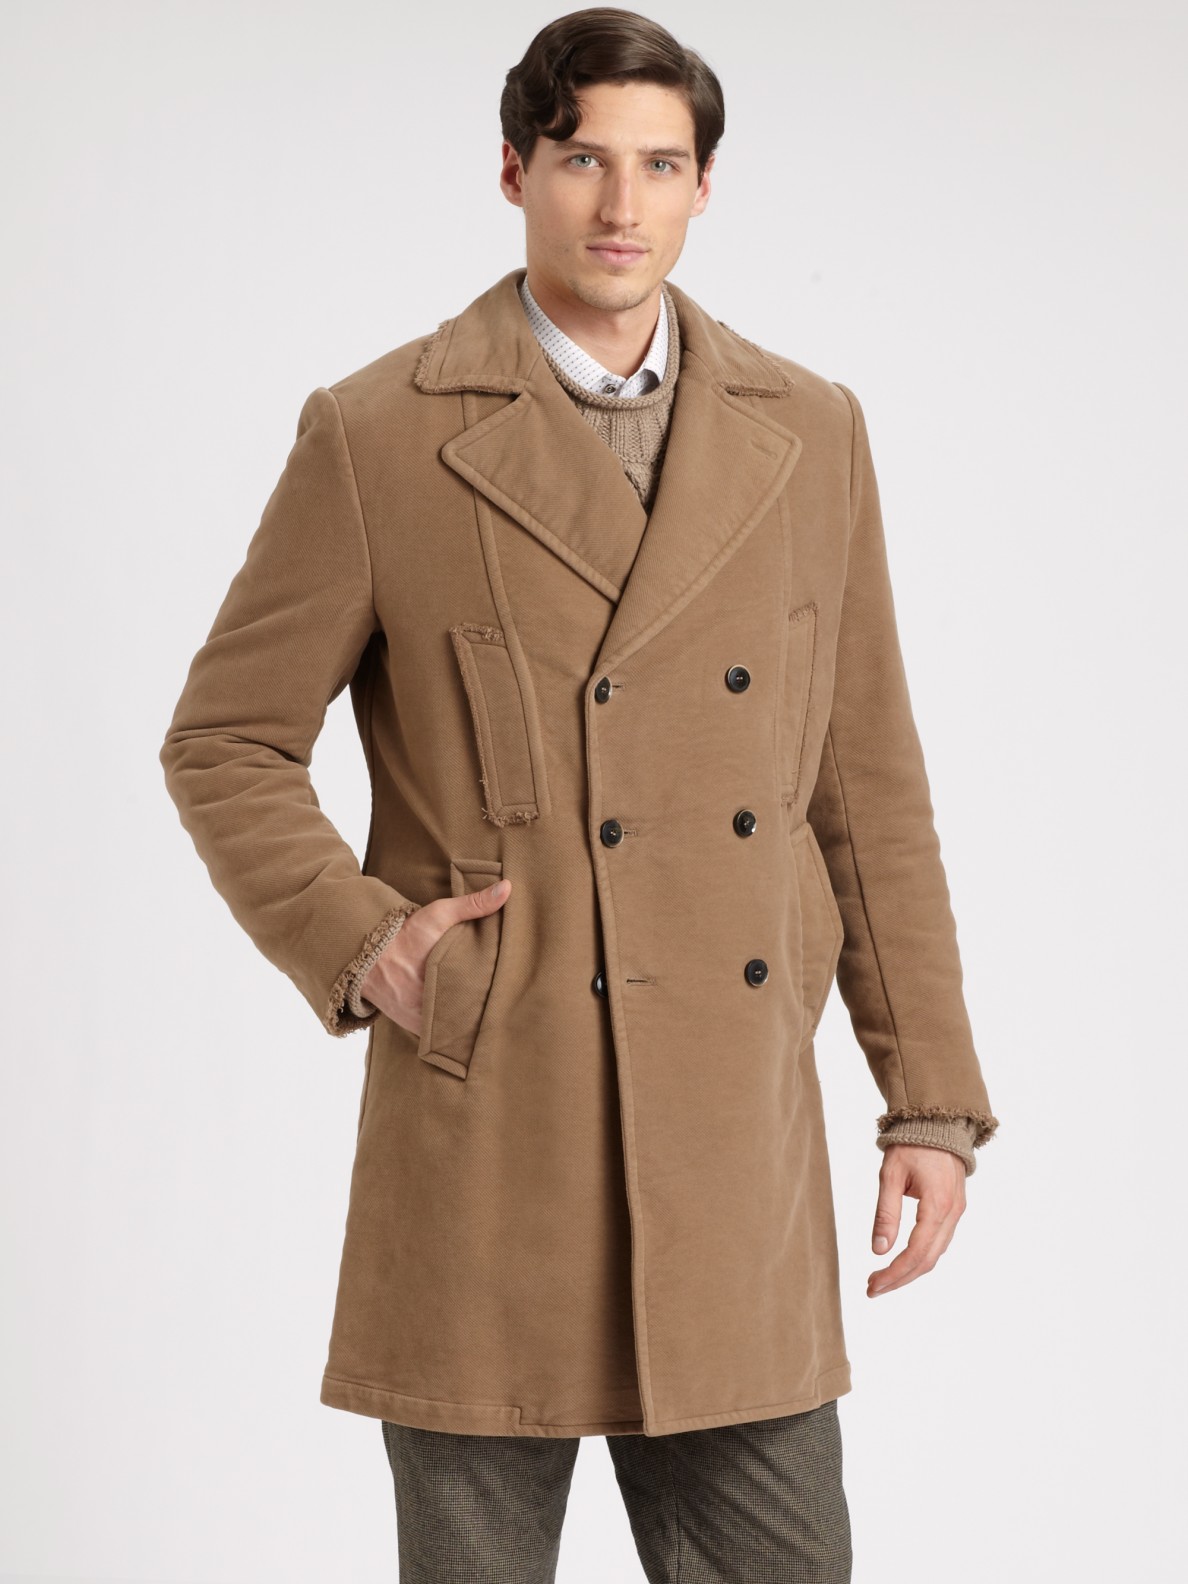 Lyst - Dolce & Gabbana Corduroy Peacoat in Natural for Men